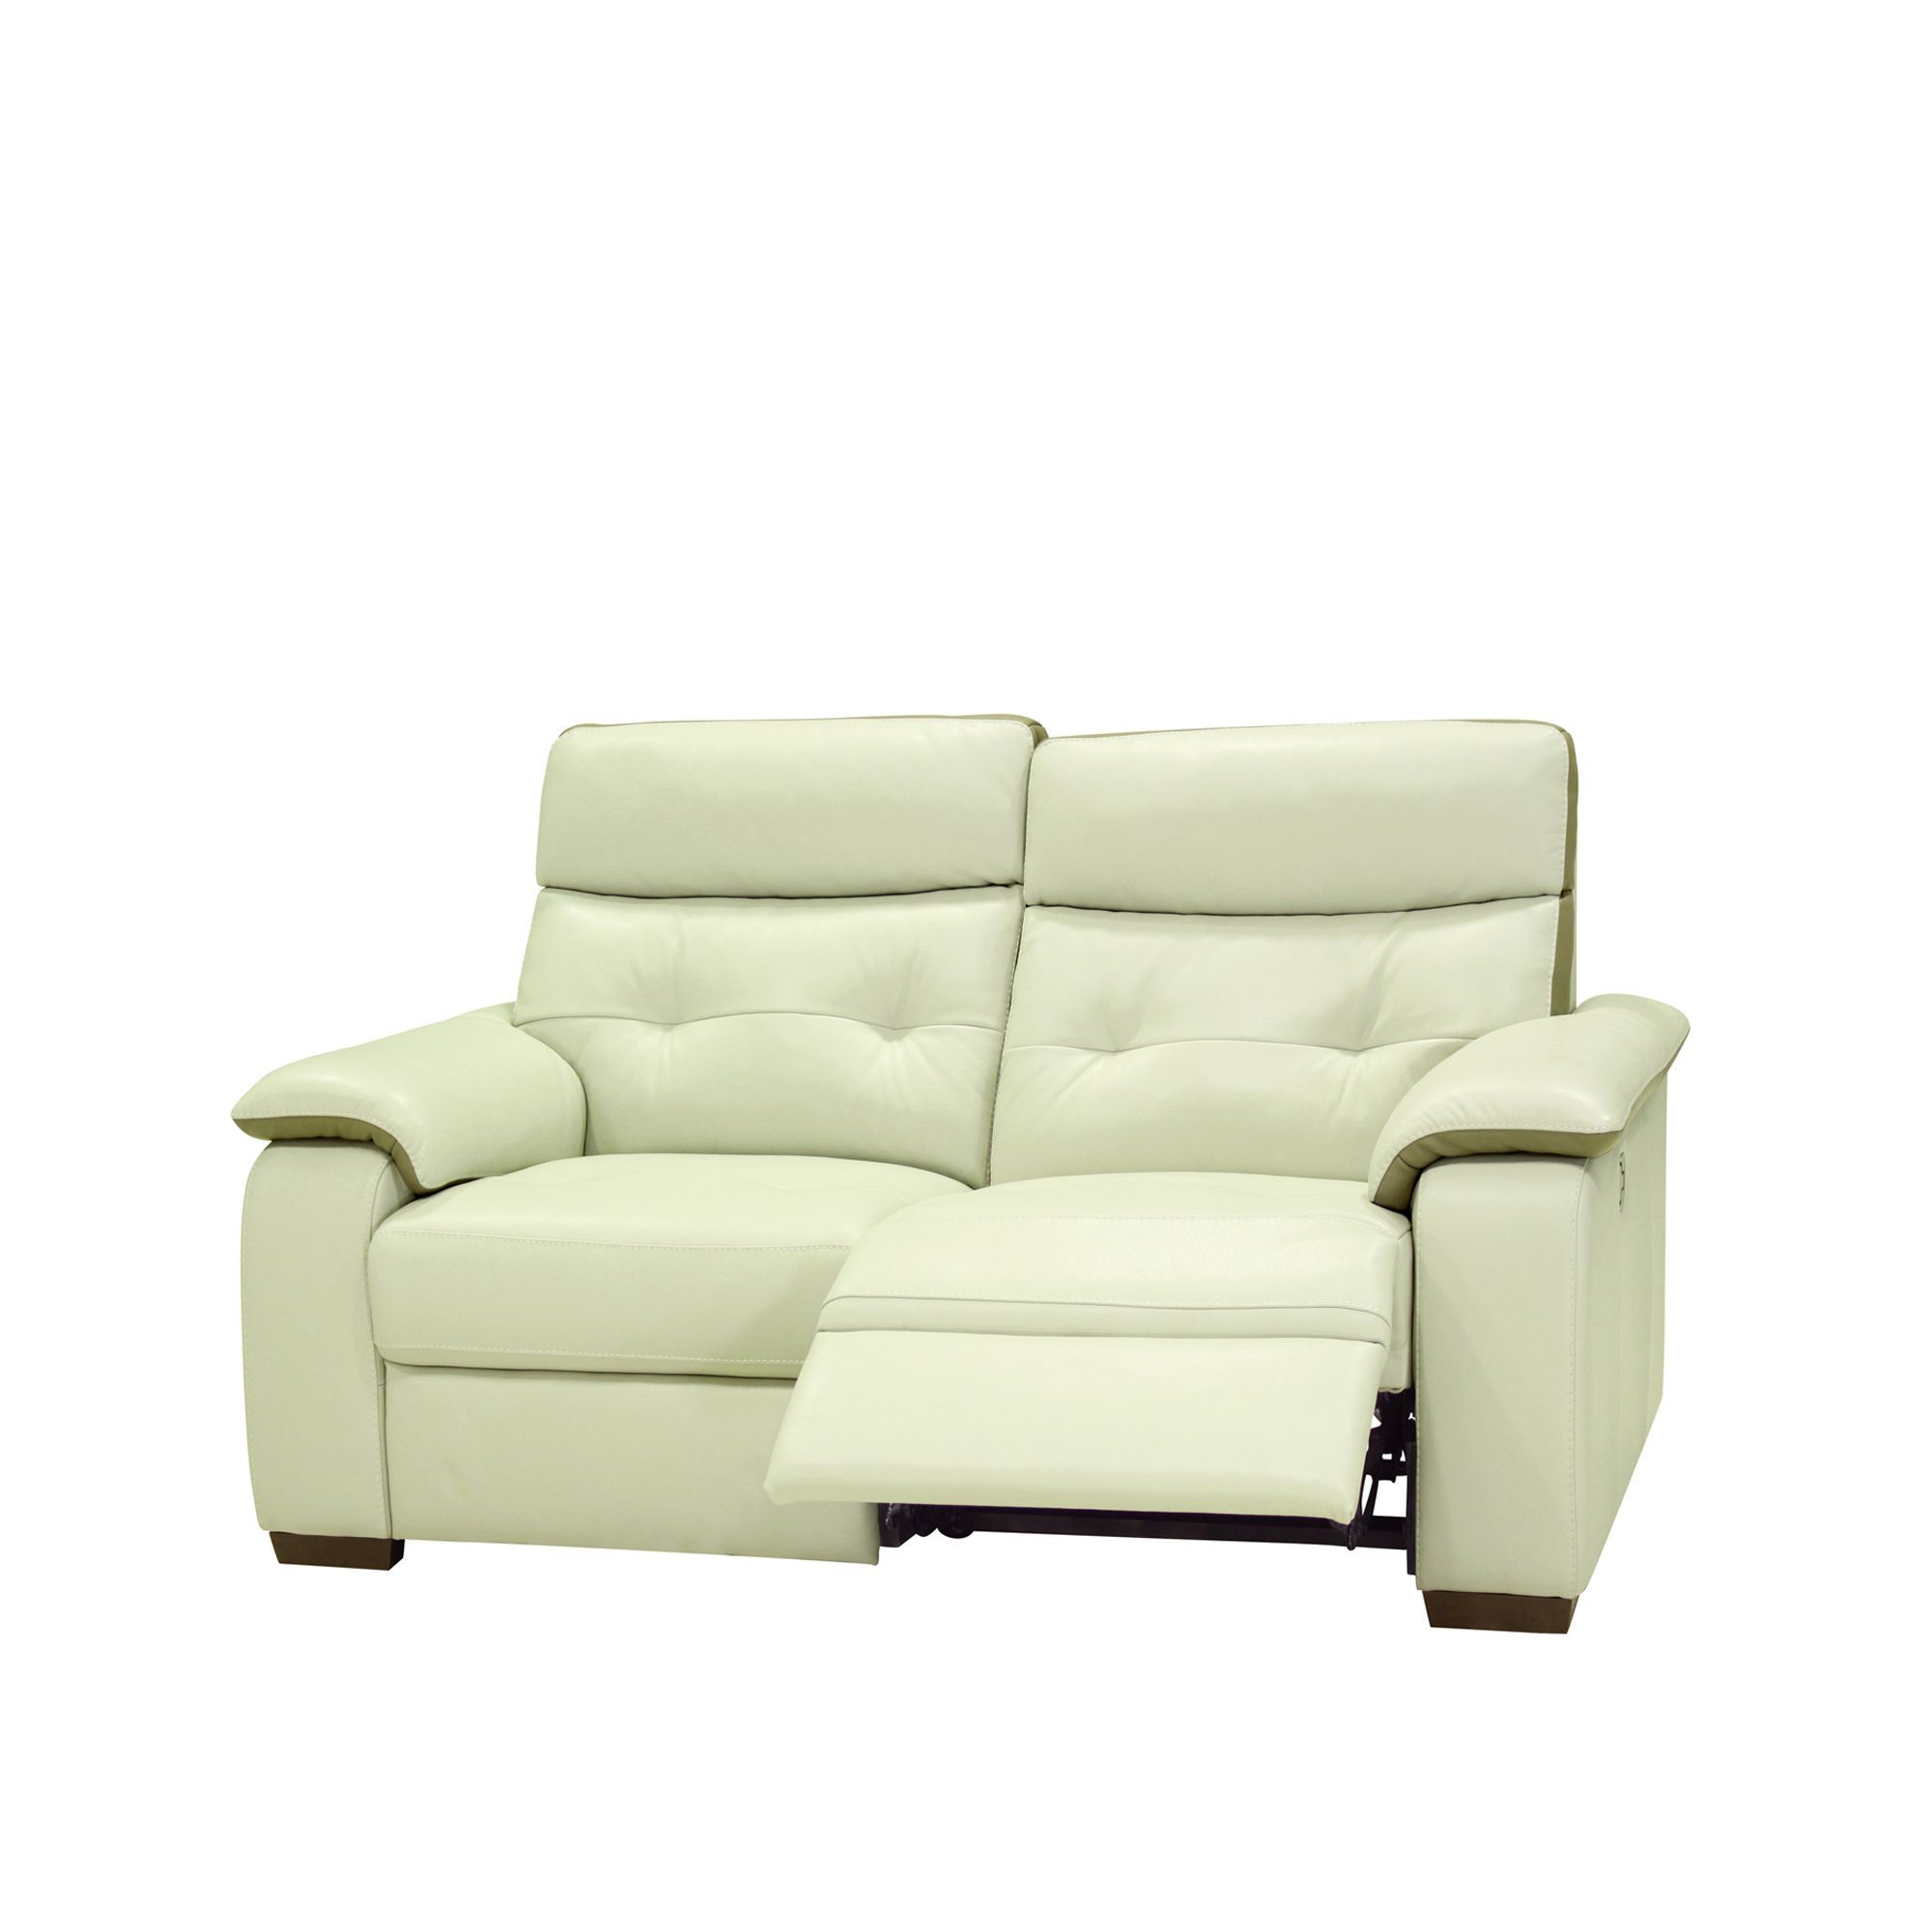 Cookes Collection Hobart 2 Seater Manual Recliner Sofa Living